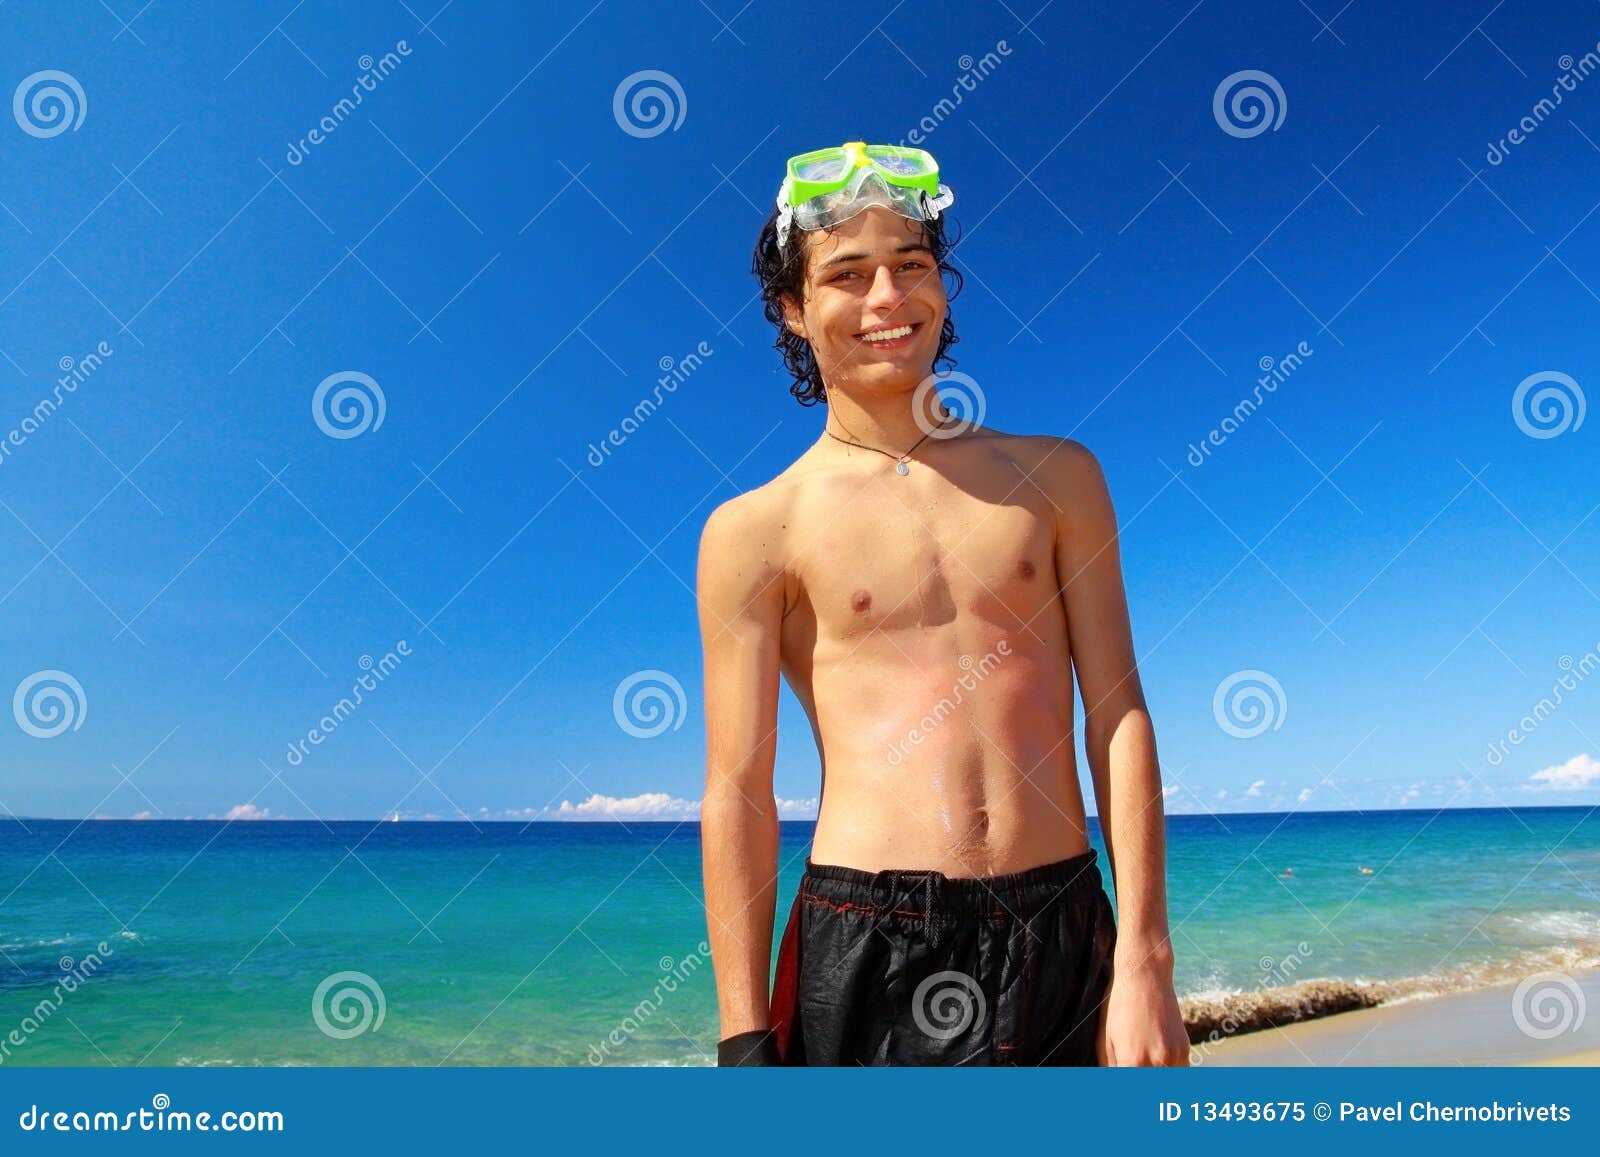 Man in Swimming Mask on Beach of Ocean Stock Image - Image of hair ...